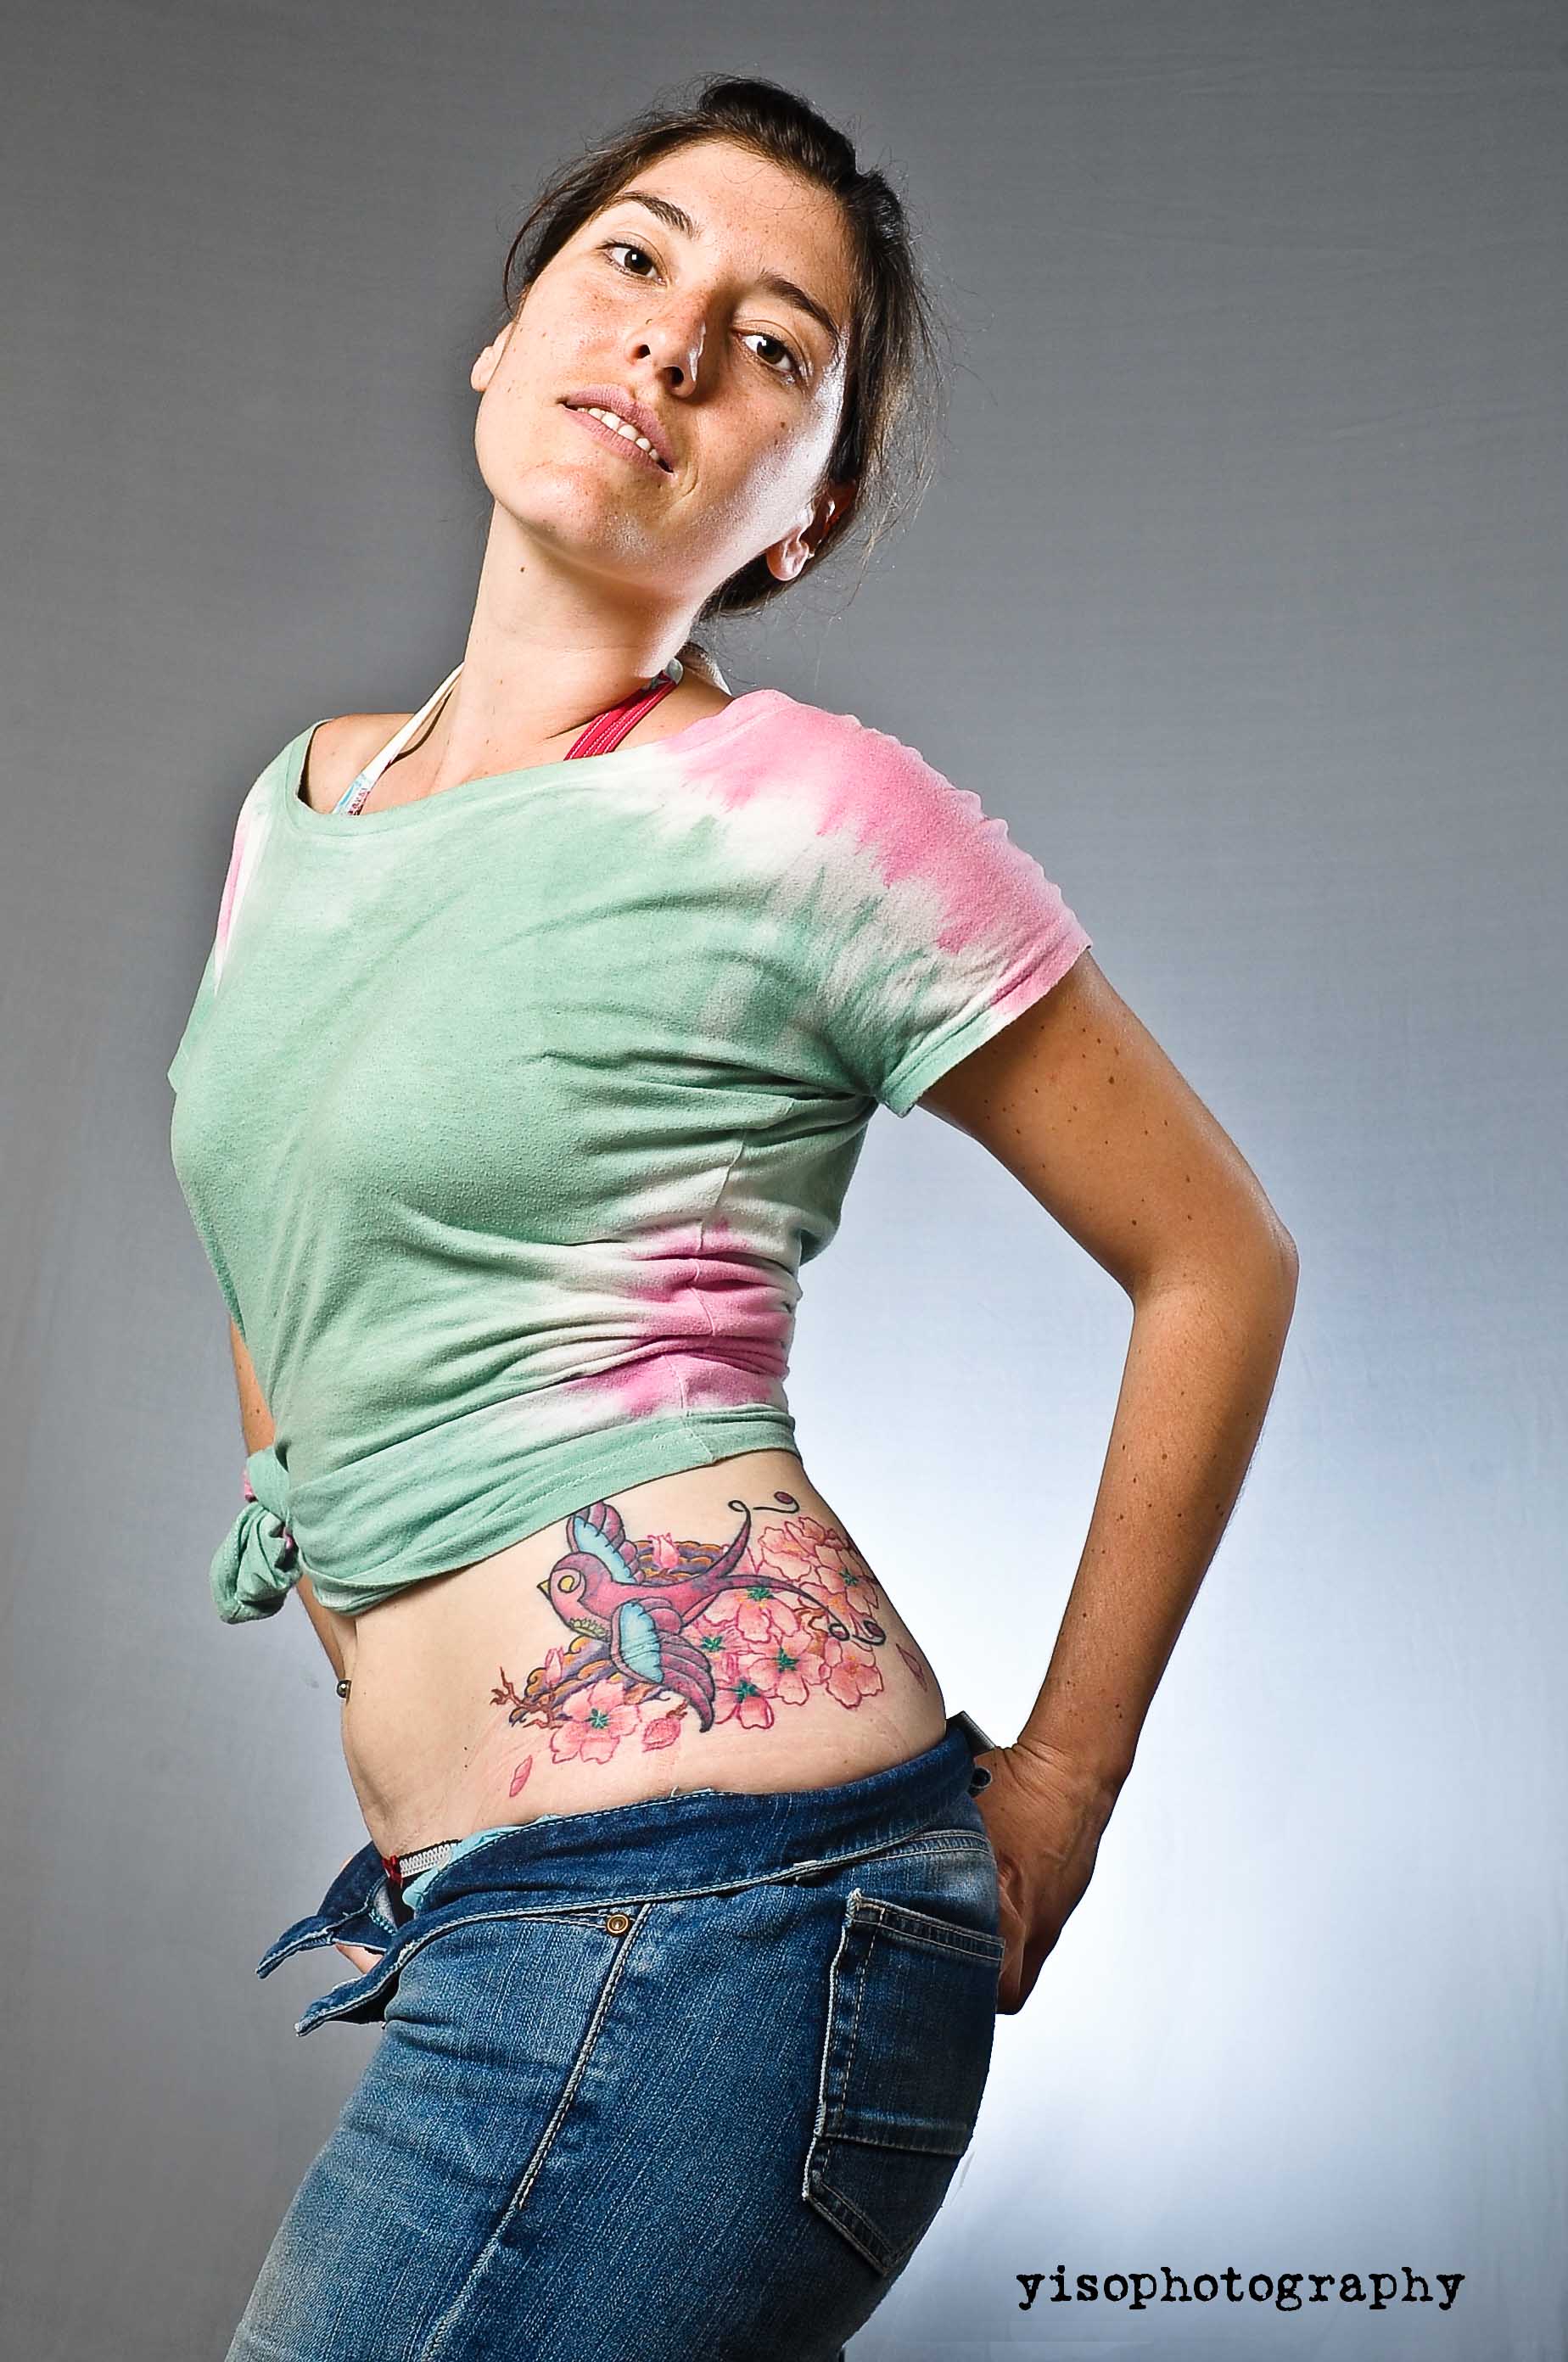 awesome tattoos for women